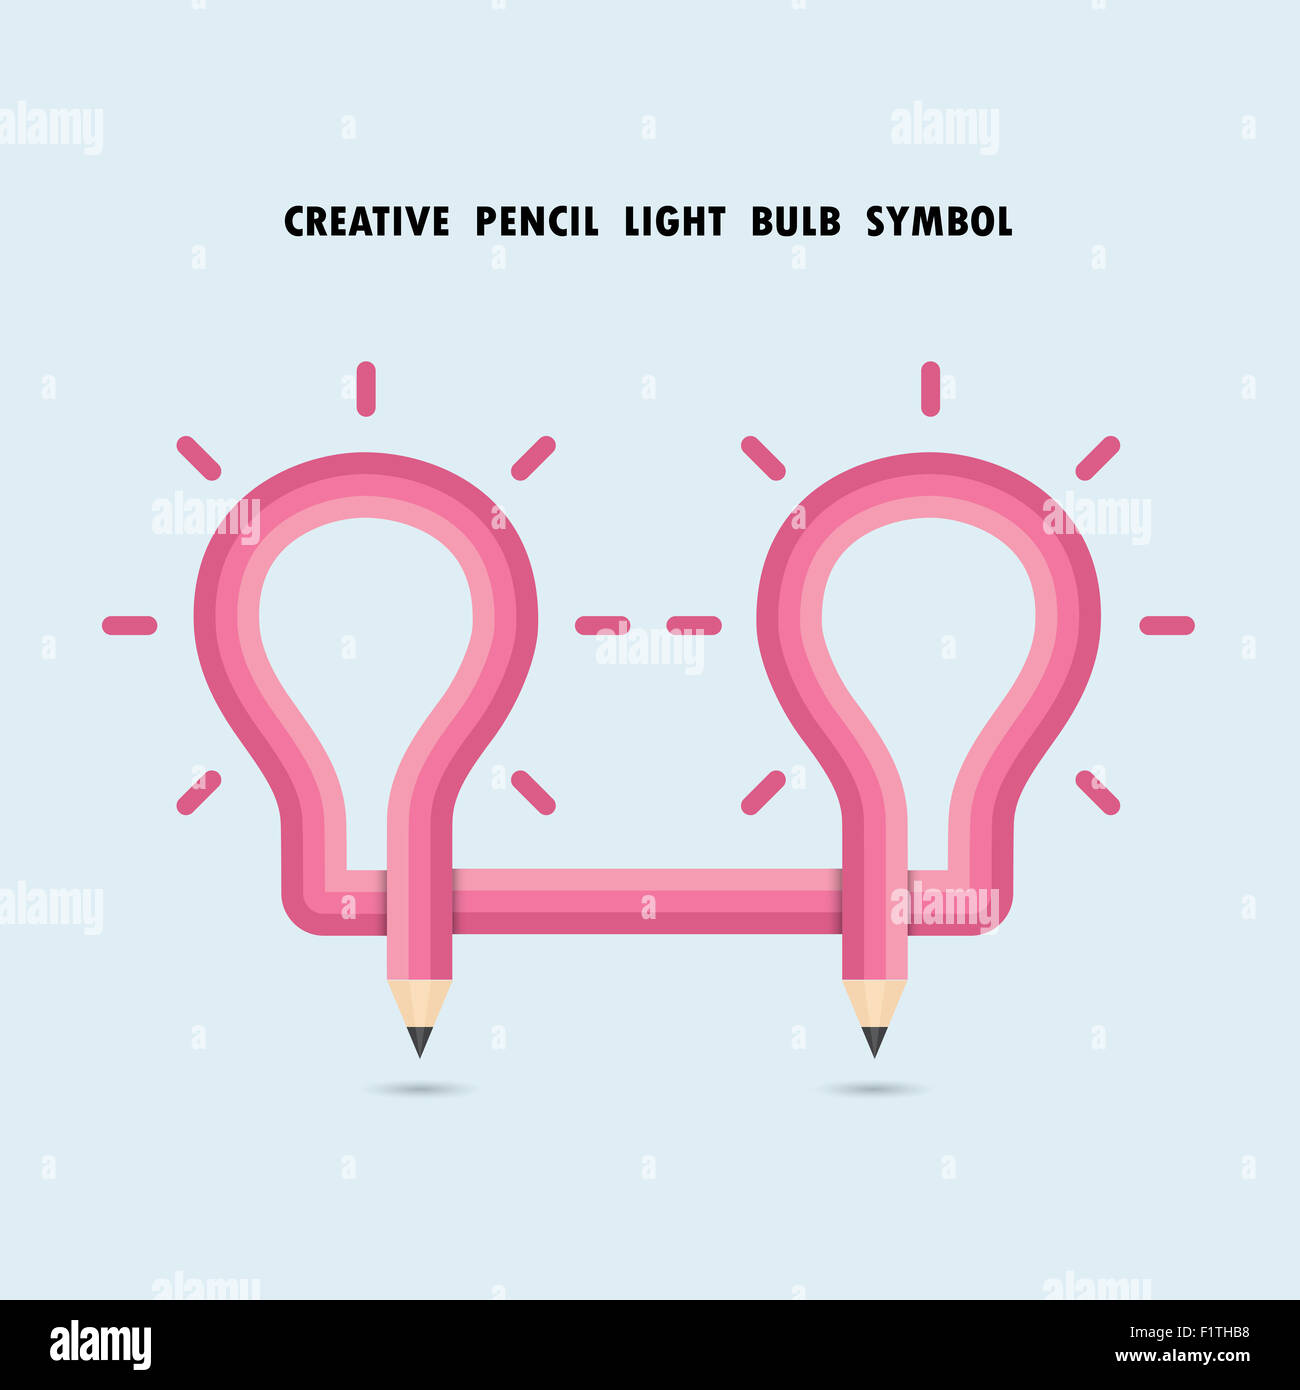 Pencil and light bulb on background. Education concept. Stock Photo